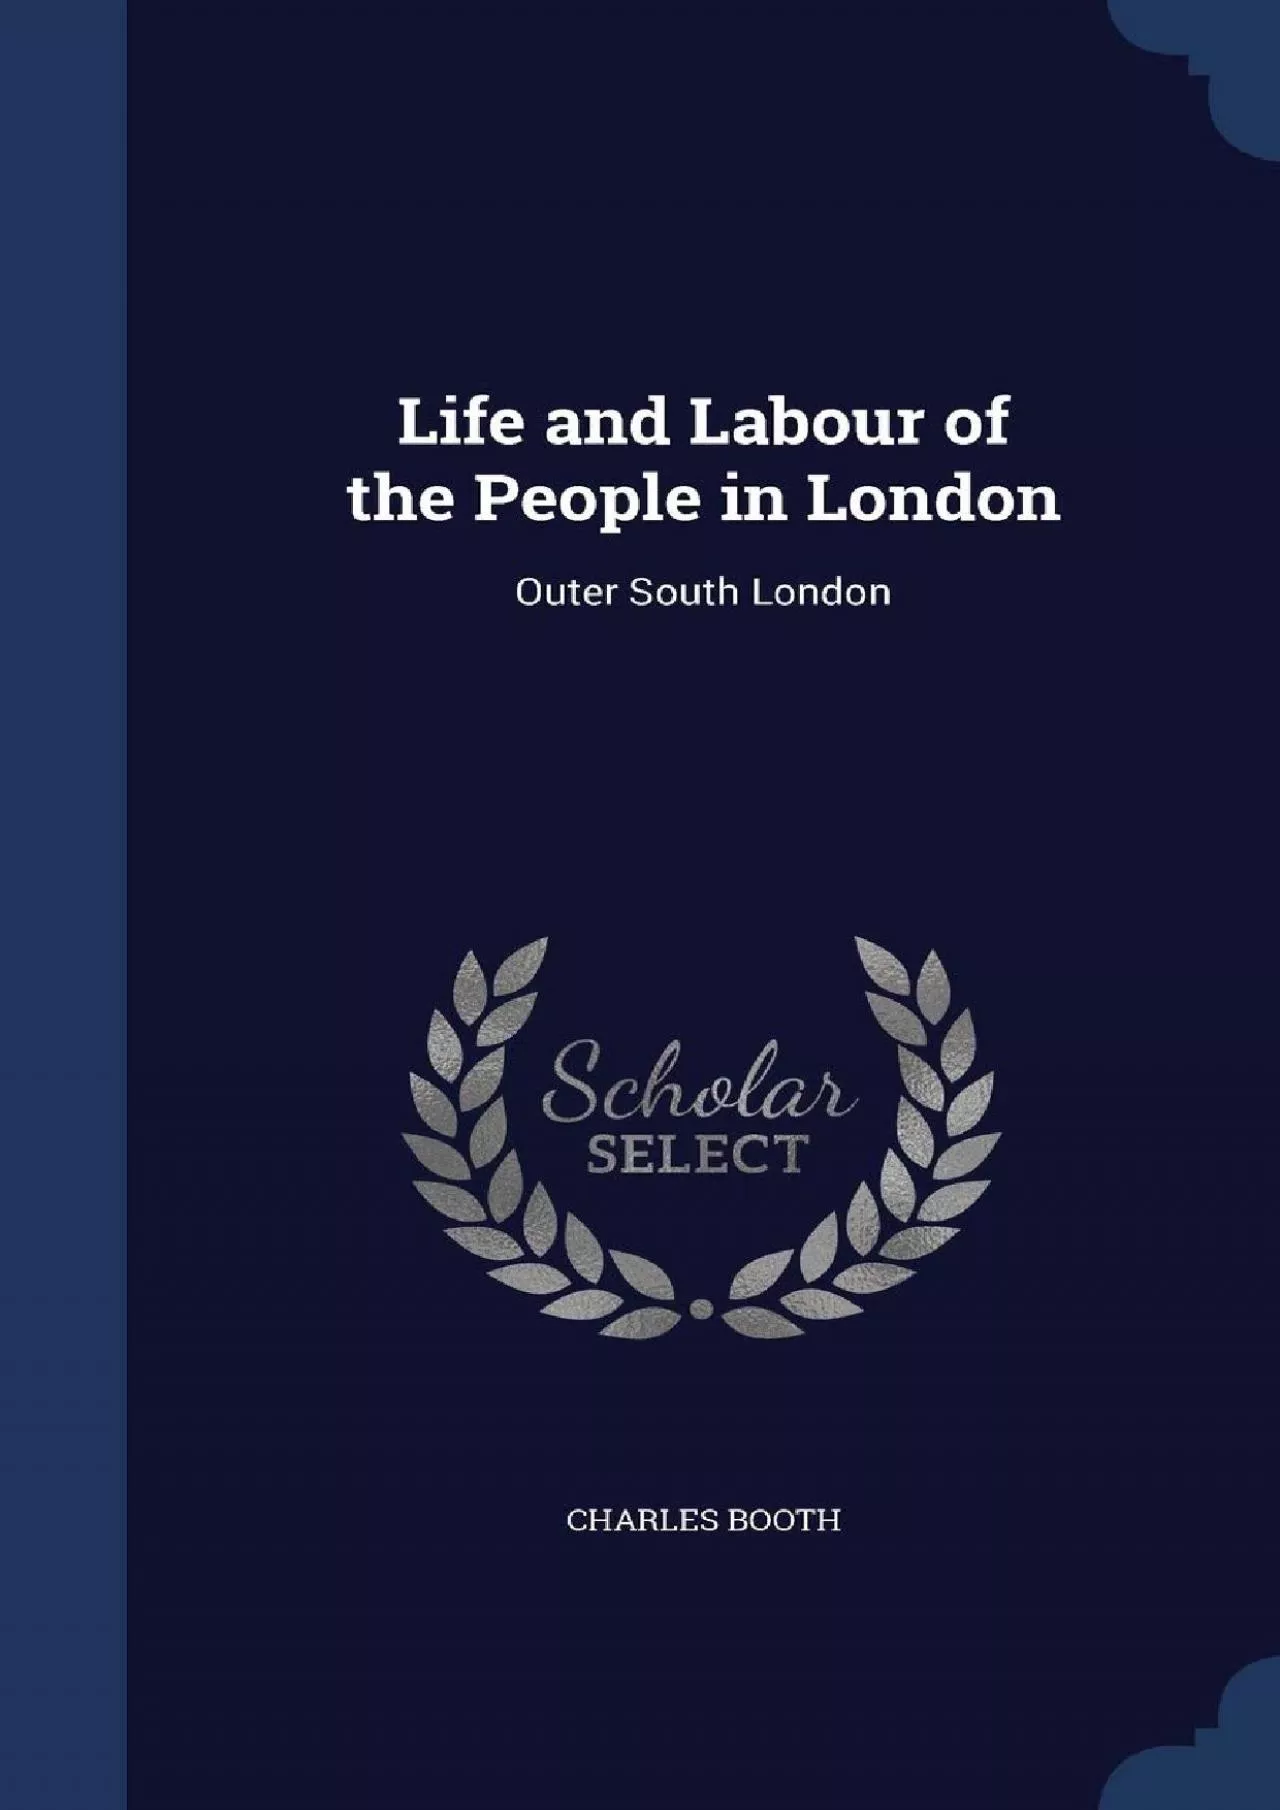 (DOWNLOAD)-Life and Labour of the People in London: Outer South London